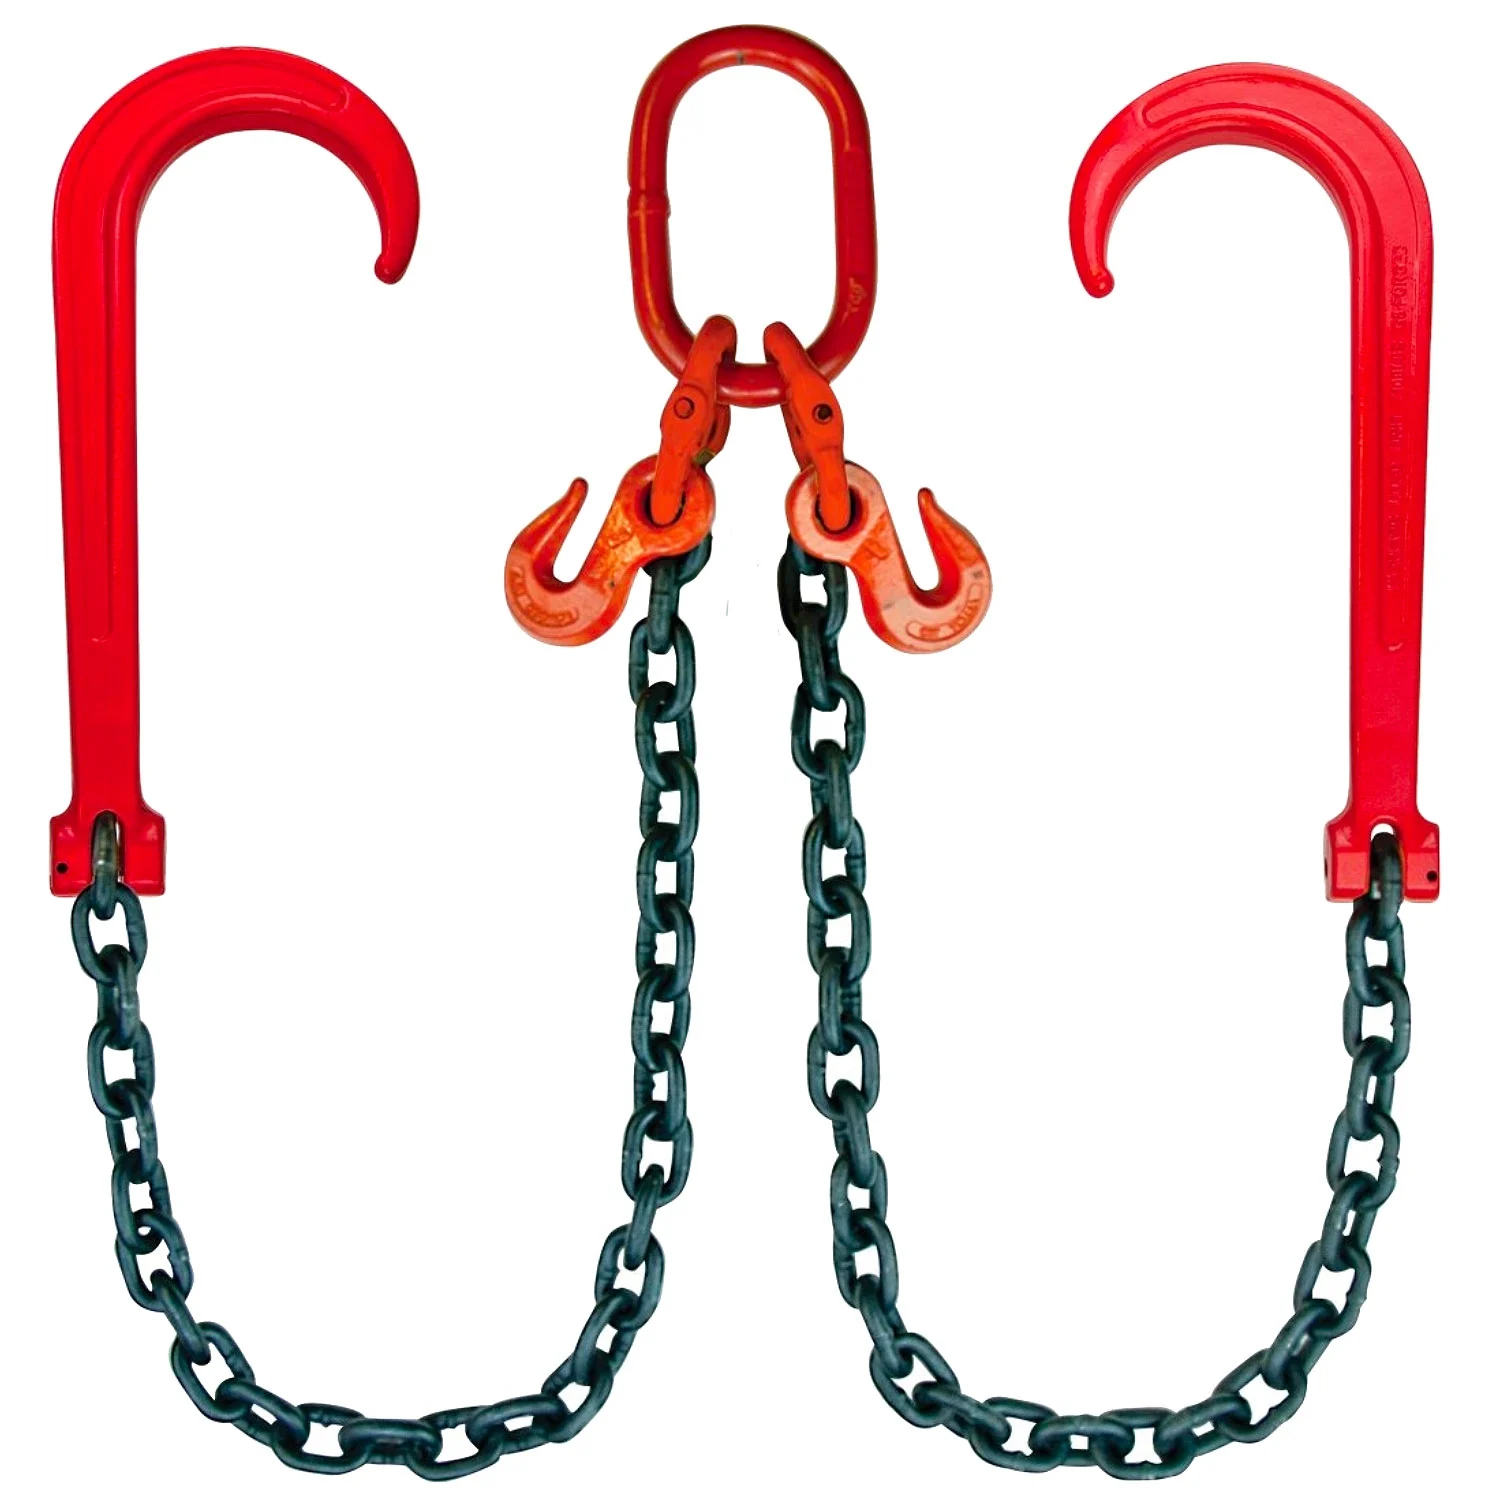 VULCAN Towing Chain Bridle - 15 Inch J Hooks - Grade 70 Chain -  Self-Centering - 4,700 Pound Safe Working Load